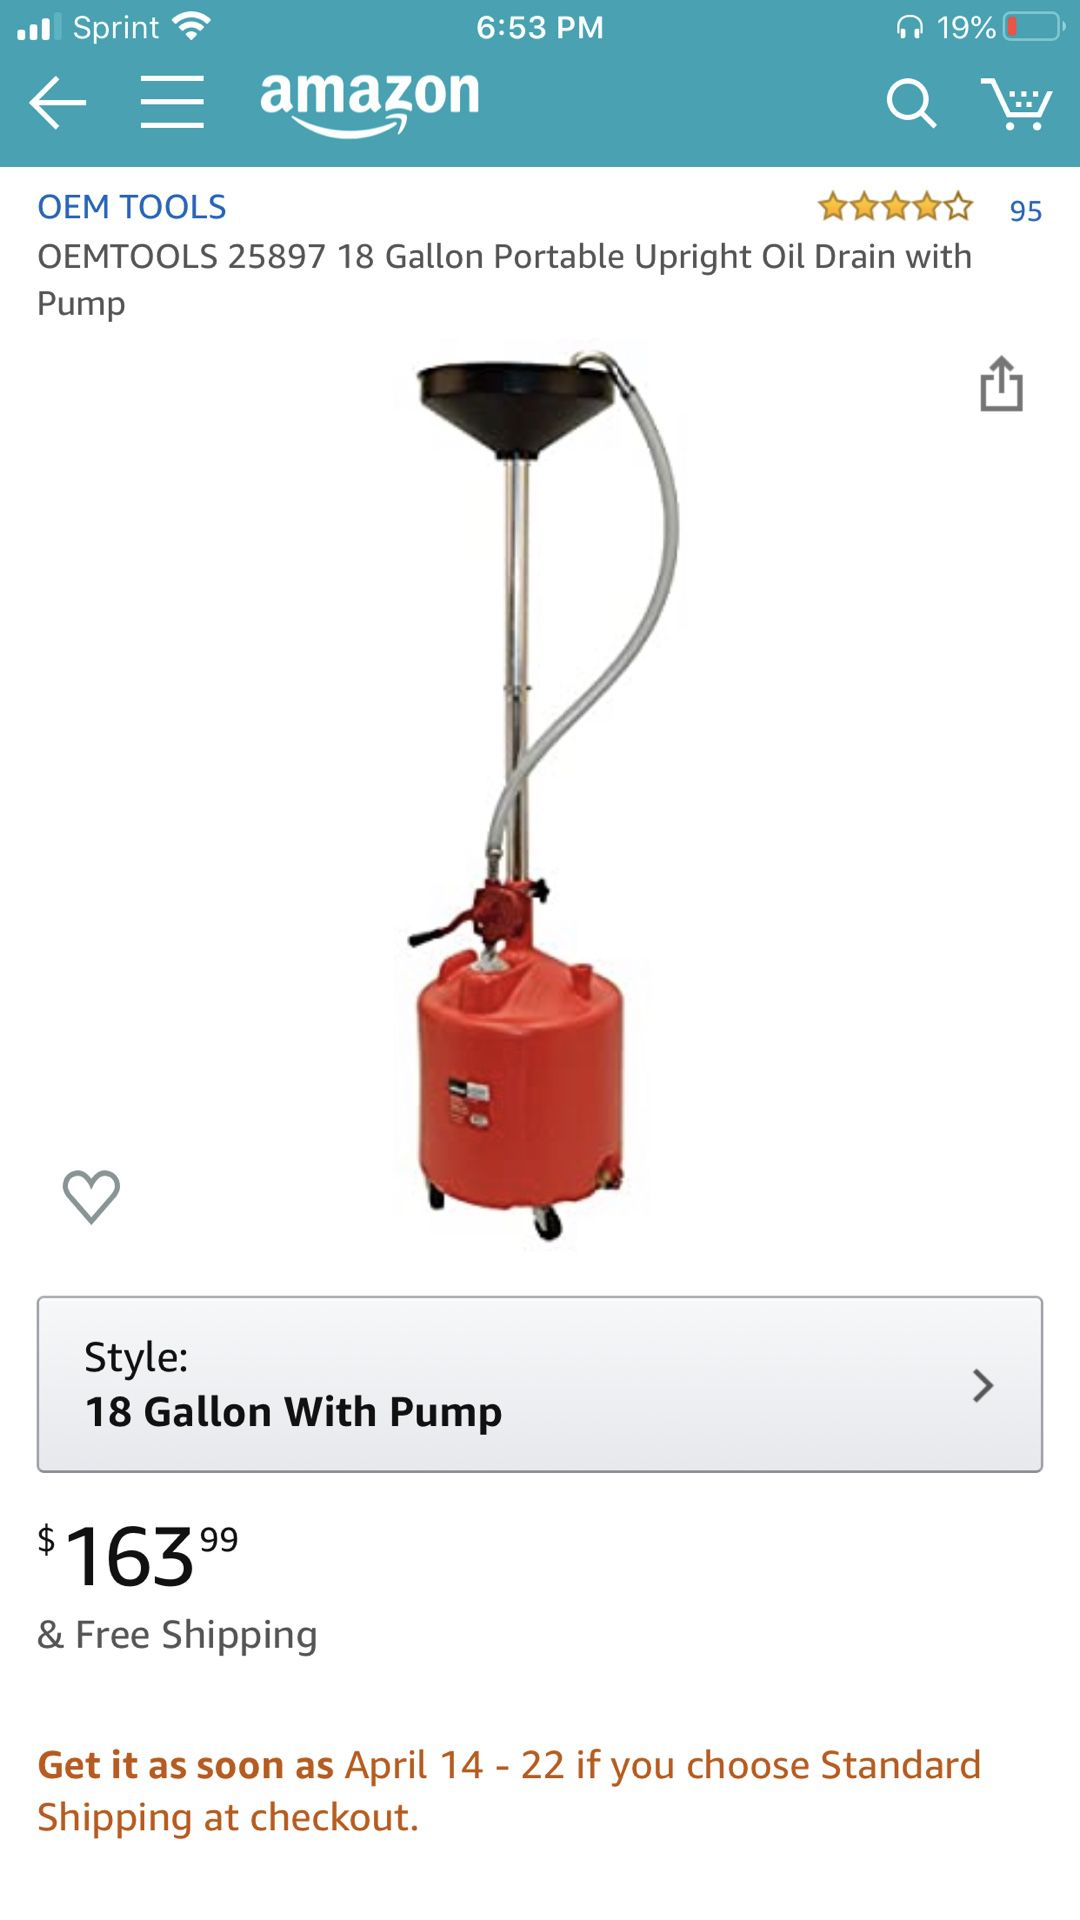 OEMTOOLS 25897 18 Gallon Portable Upright Oil Drain with Pump